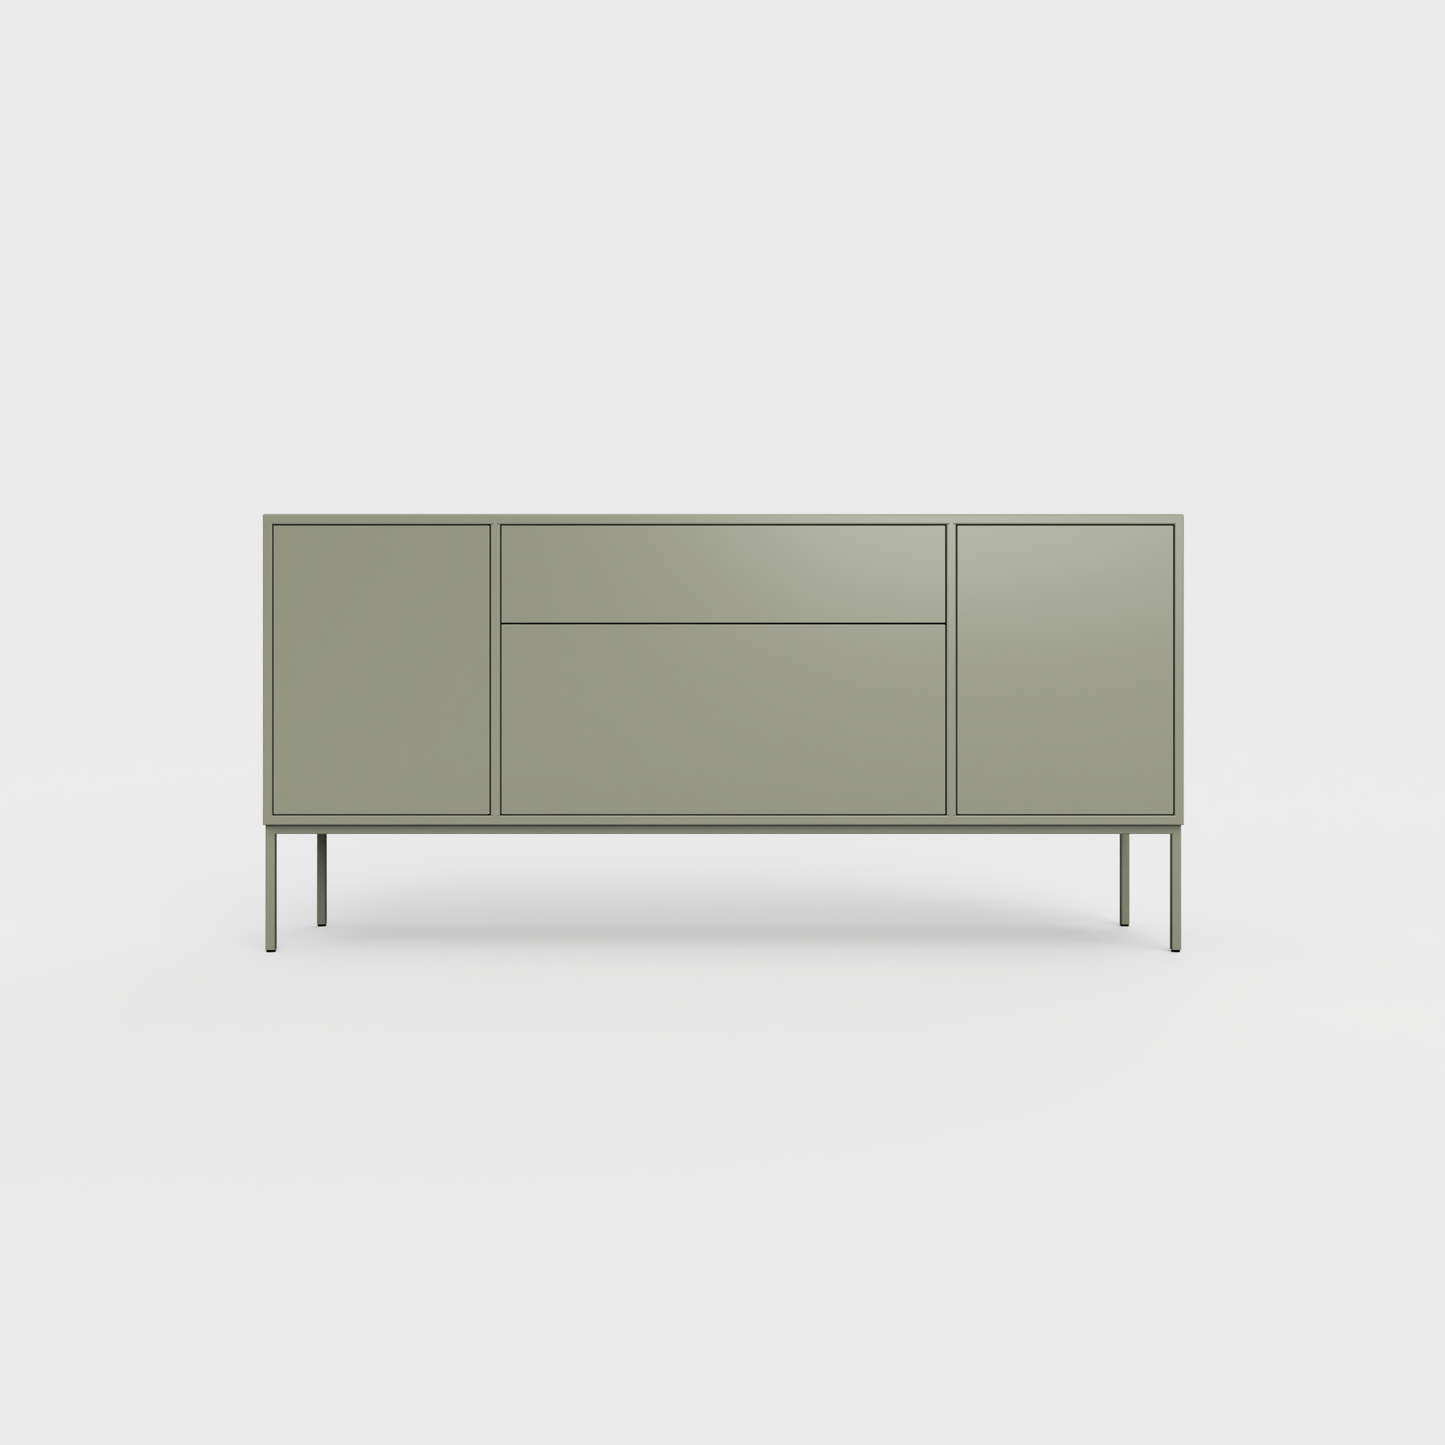 Arnika 02 Sideboard in Faded Olive color, powder-coated steel, elegant and modern piece of furniture for your living room